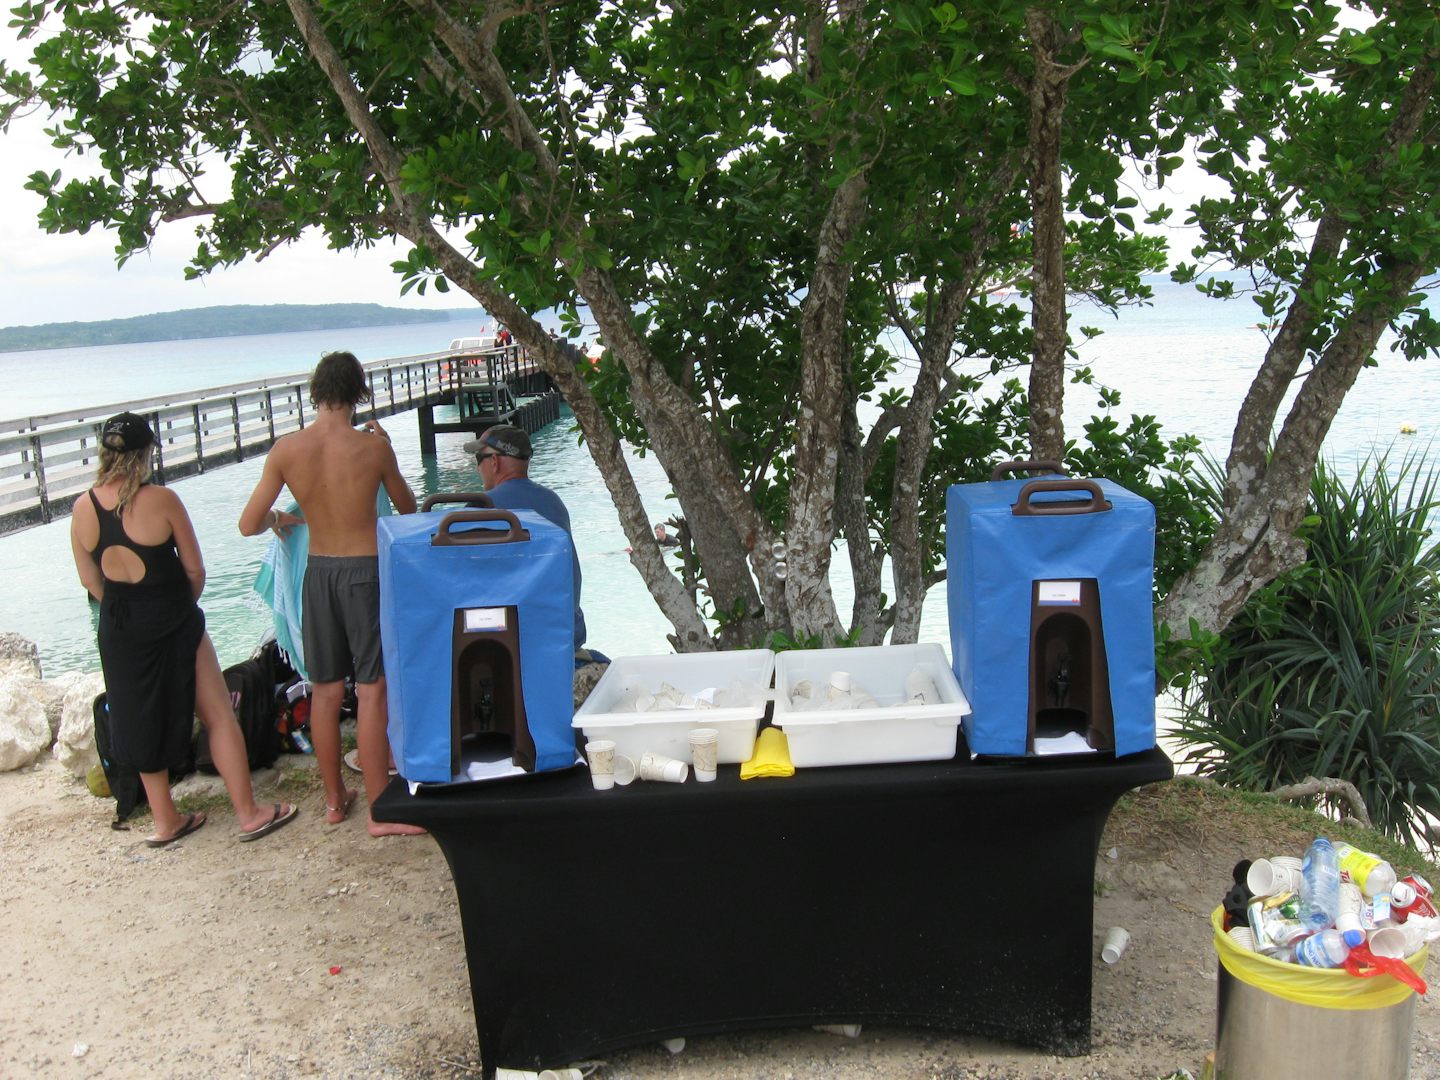 Water coolers supplied by carnival